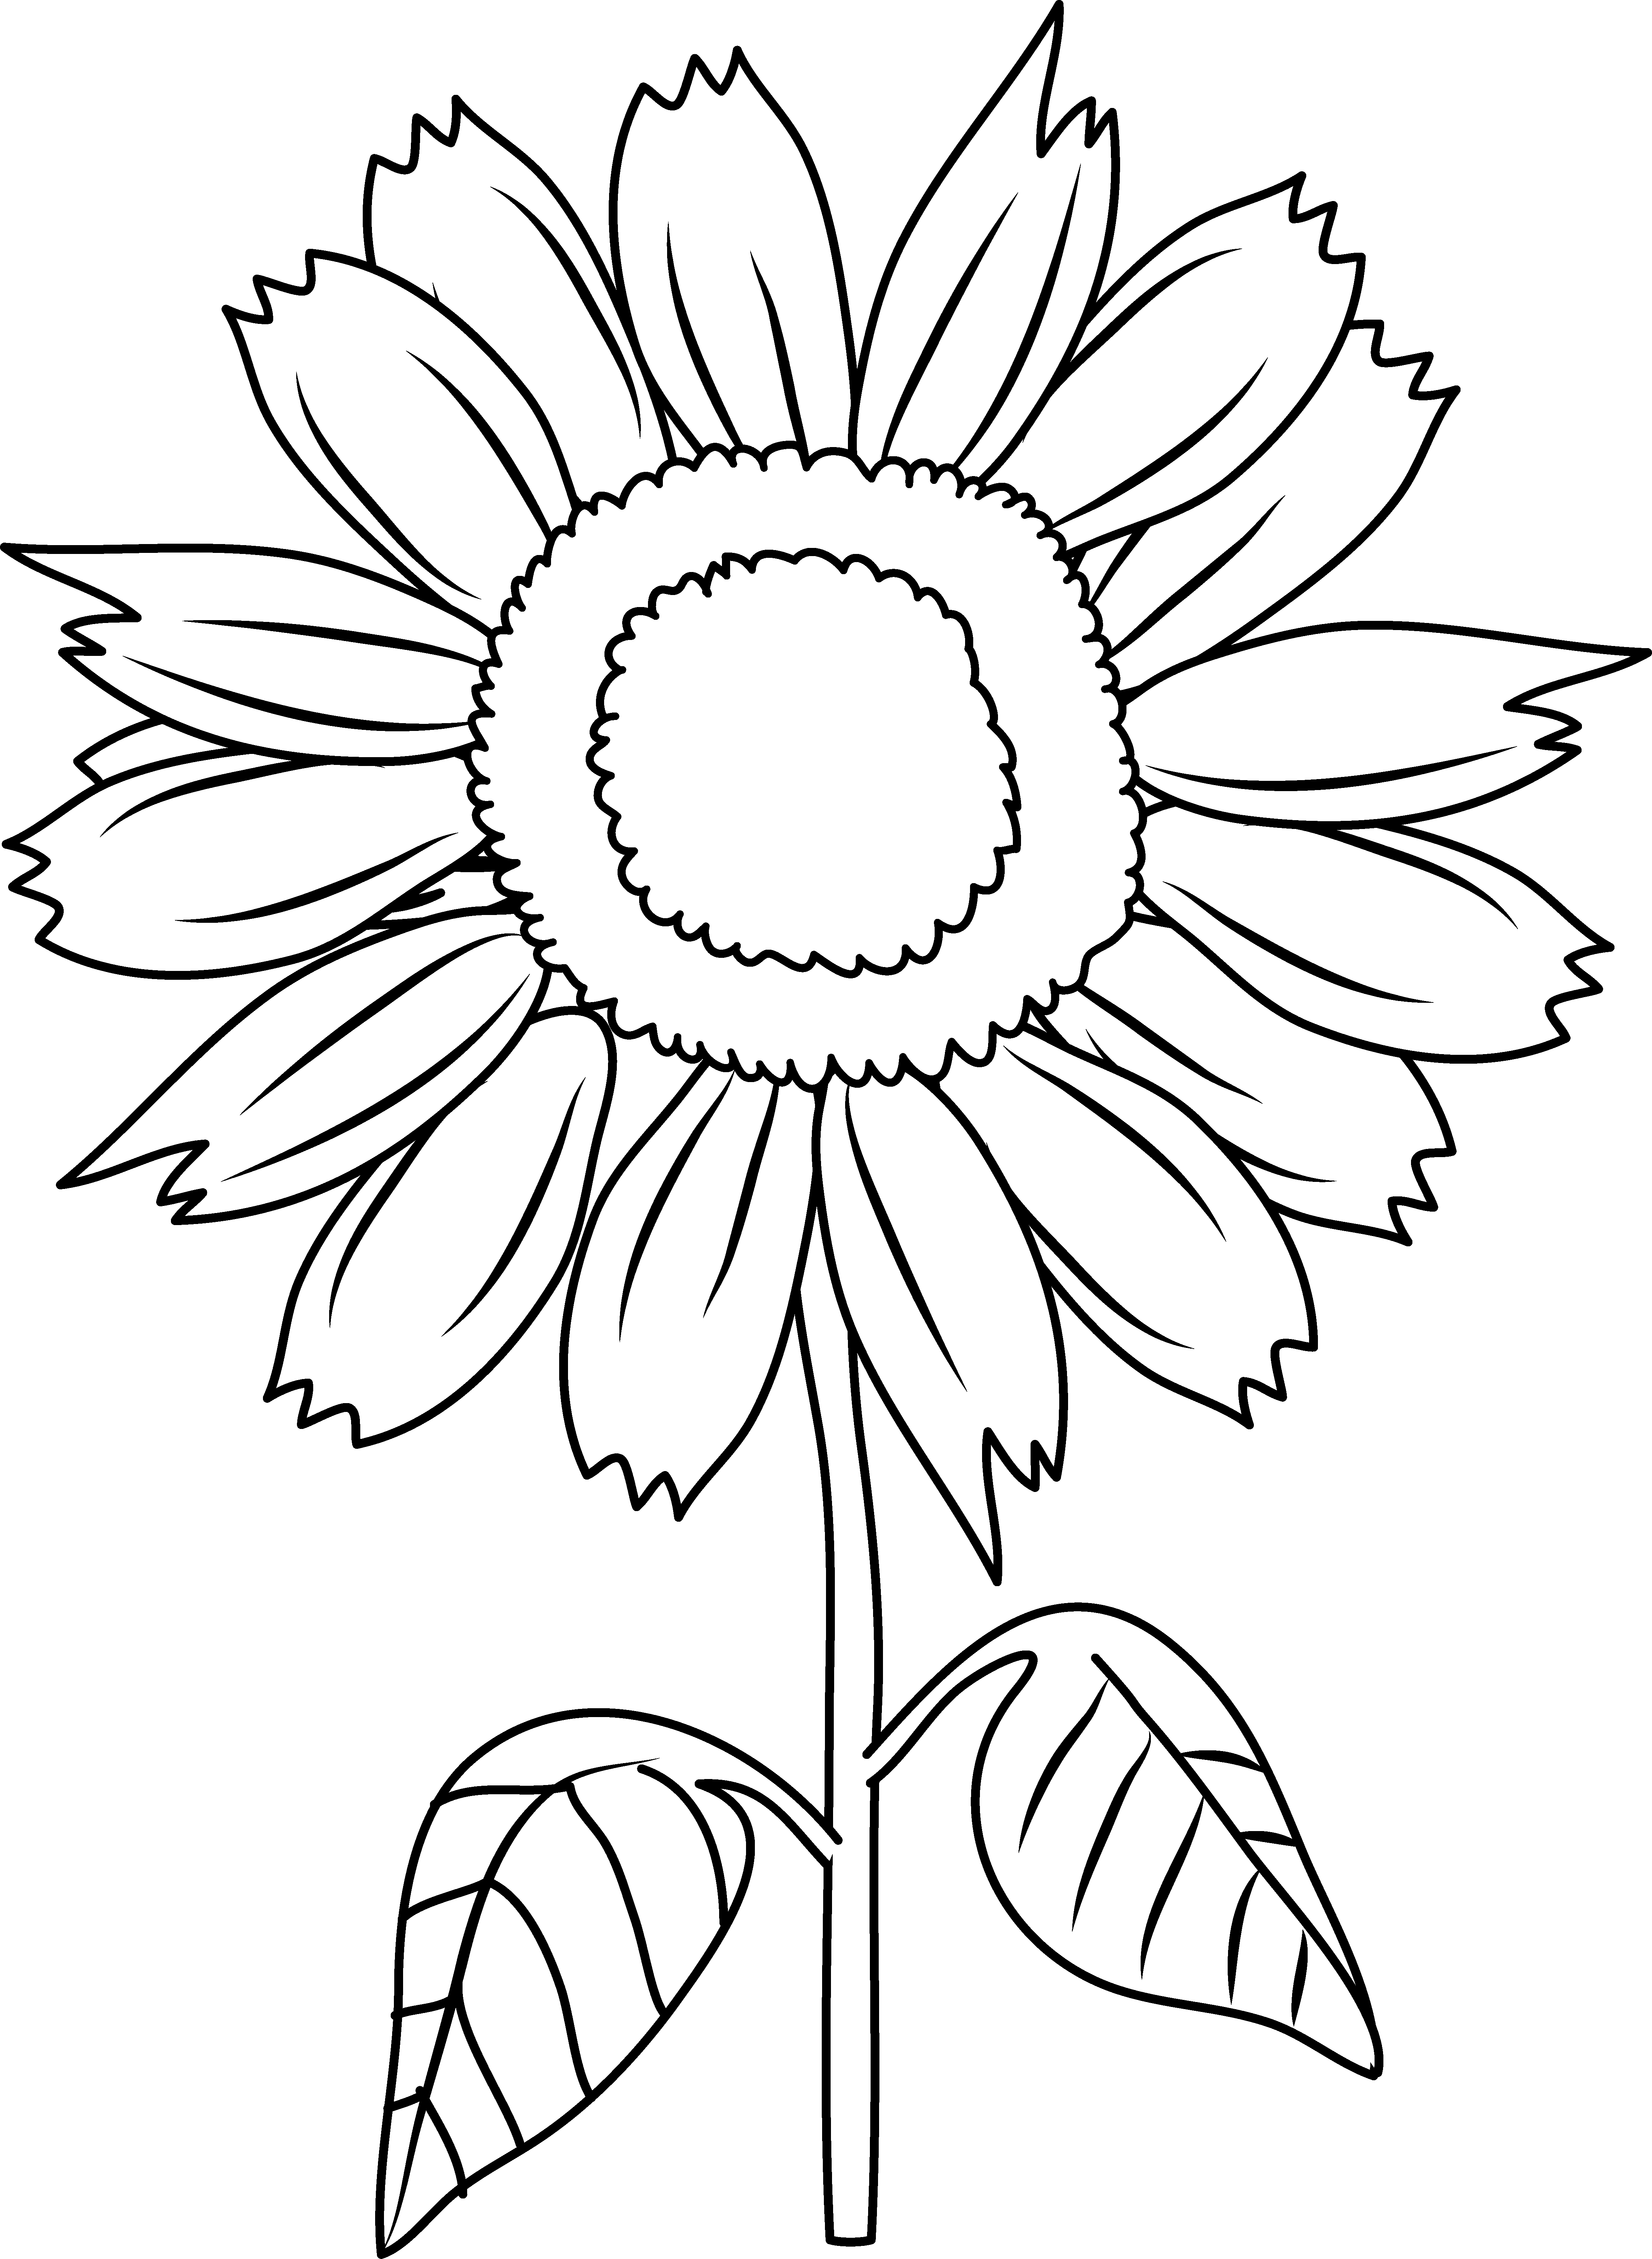 4668x6382 Free Black And White Sunflower Wallpaper, Download Free Clip Art...